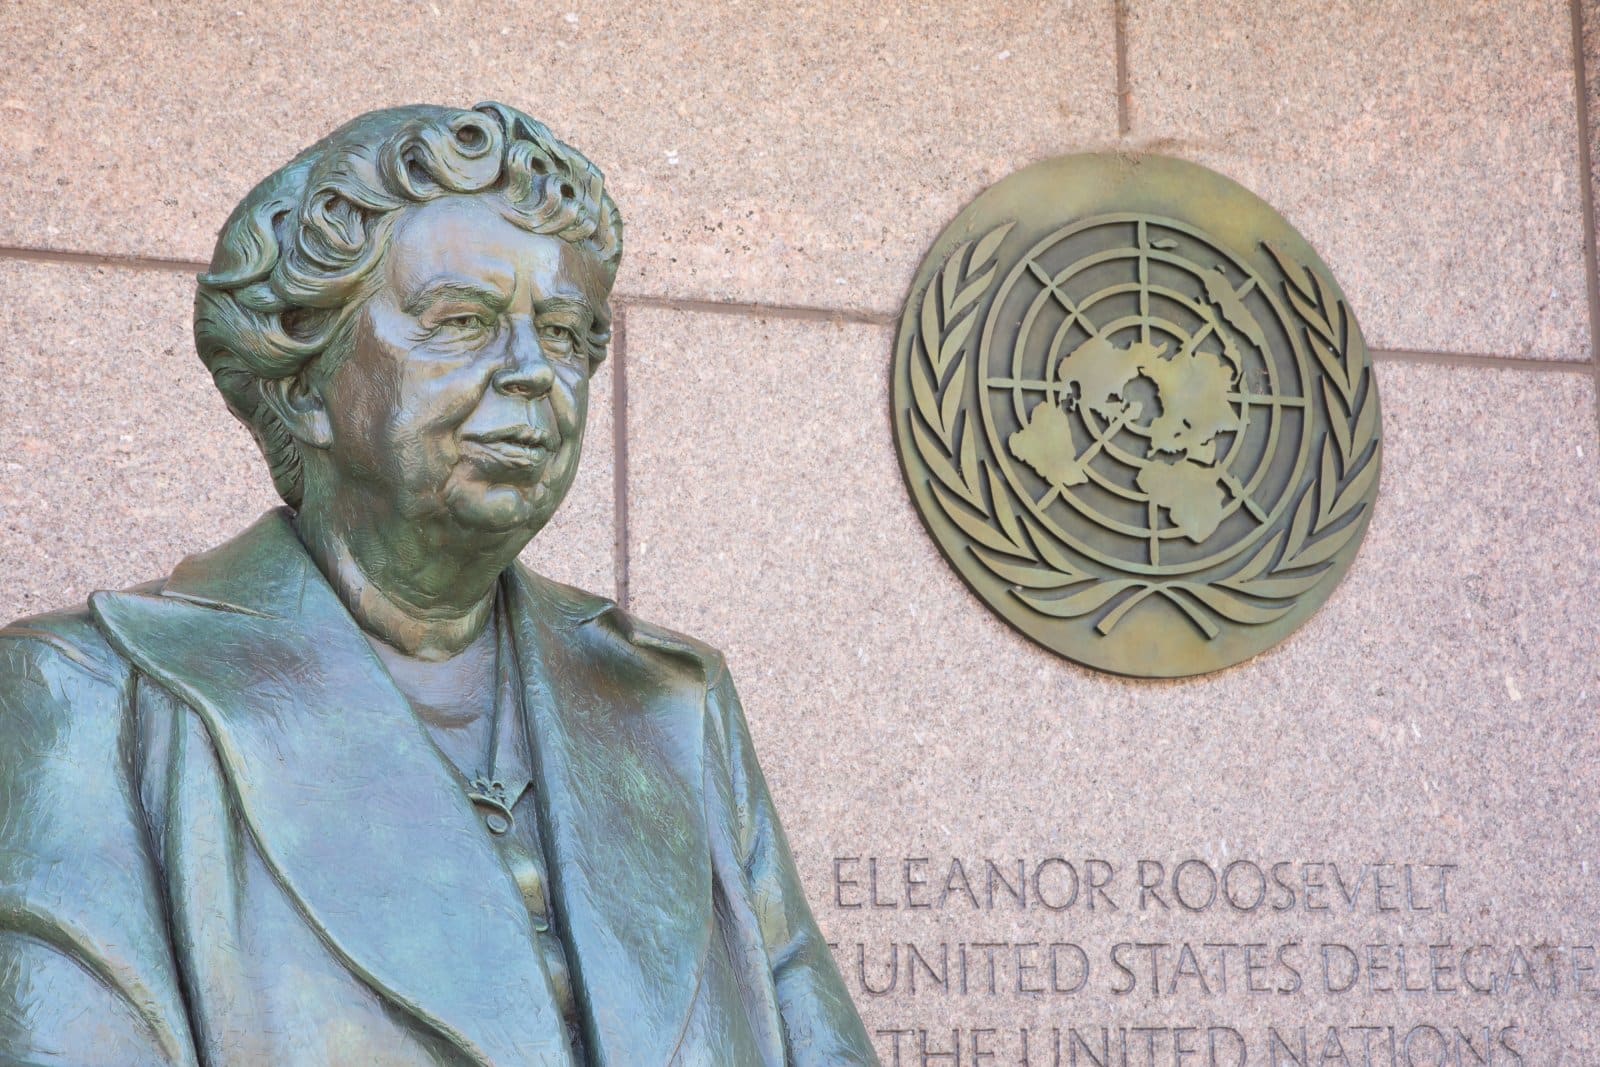 Image Credit: Shutterstock / Mark Van Scyoc <p><span>Women such as Mary McLeod Bethune and Eleanor Roosevelt championed education reform. Their efforts helped improve access to quality education for all, particularly for marginalized communities.</span></p>